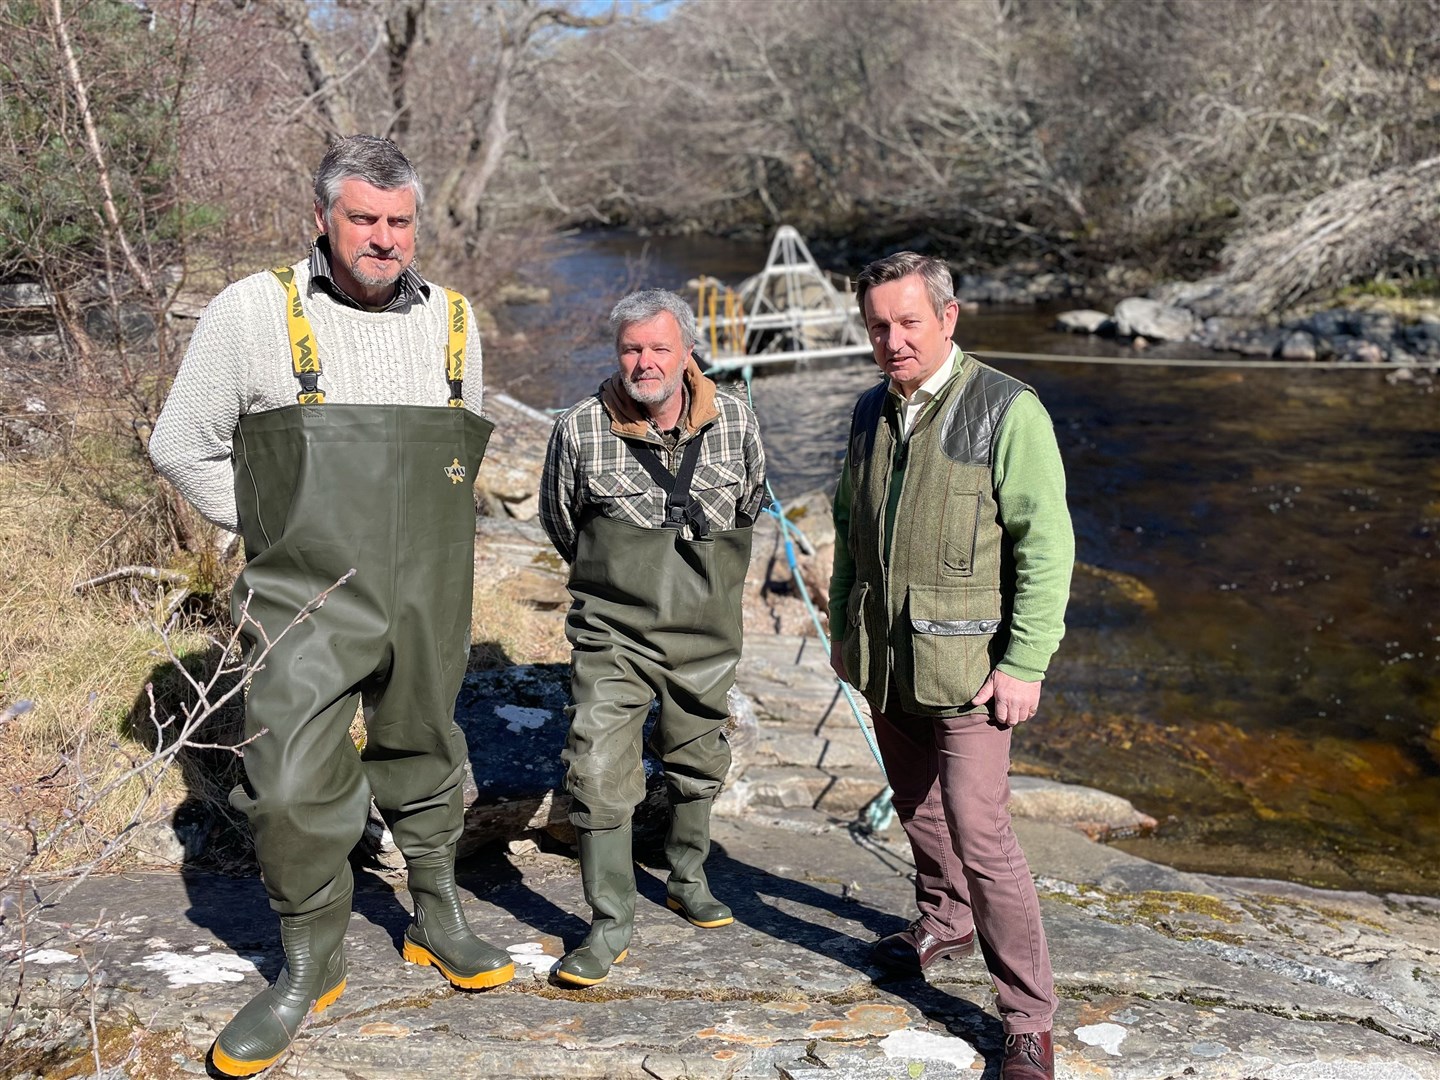 Spey Fishery Board biologists and director, from L to R: Steve Burns, Kevin Greensill, Roger Knight. Photo: Spey Fishery Board